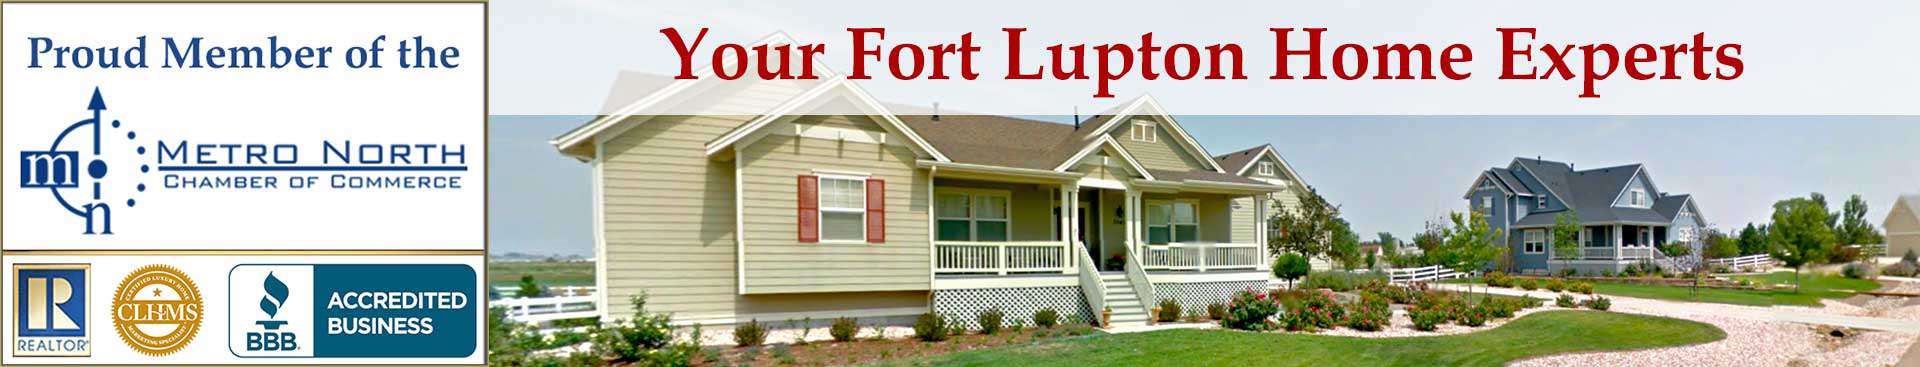 Fort Lupton CO Accreditations Banner